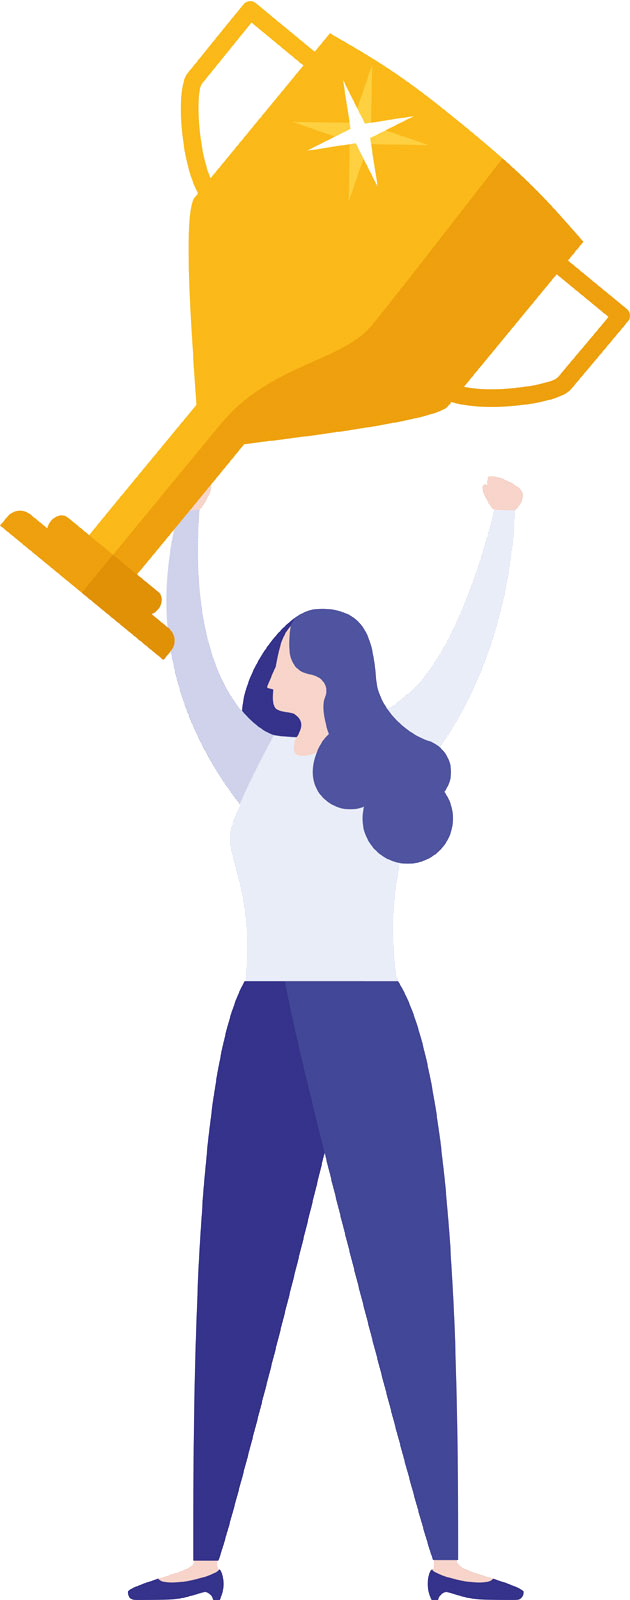 Illustrated woman holding a gold trophy aloft